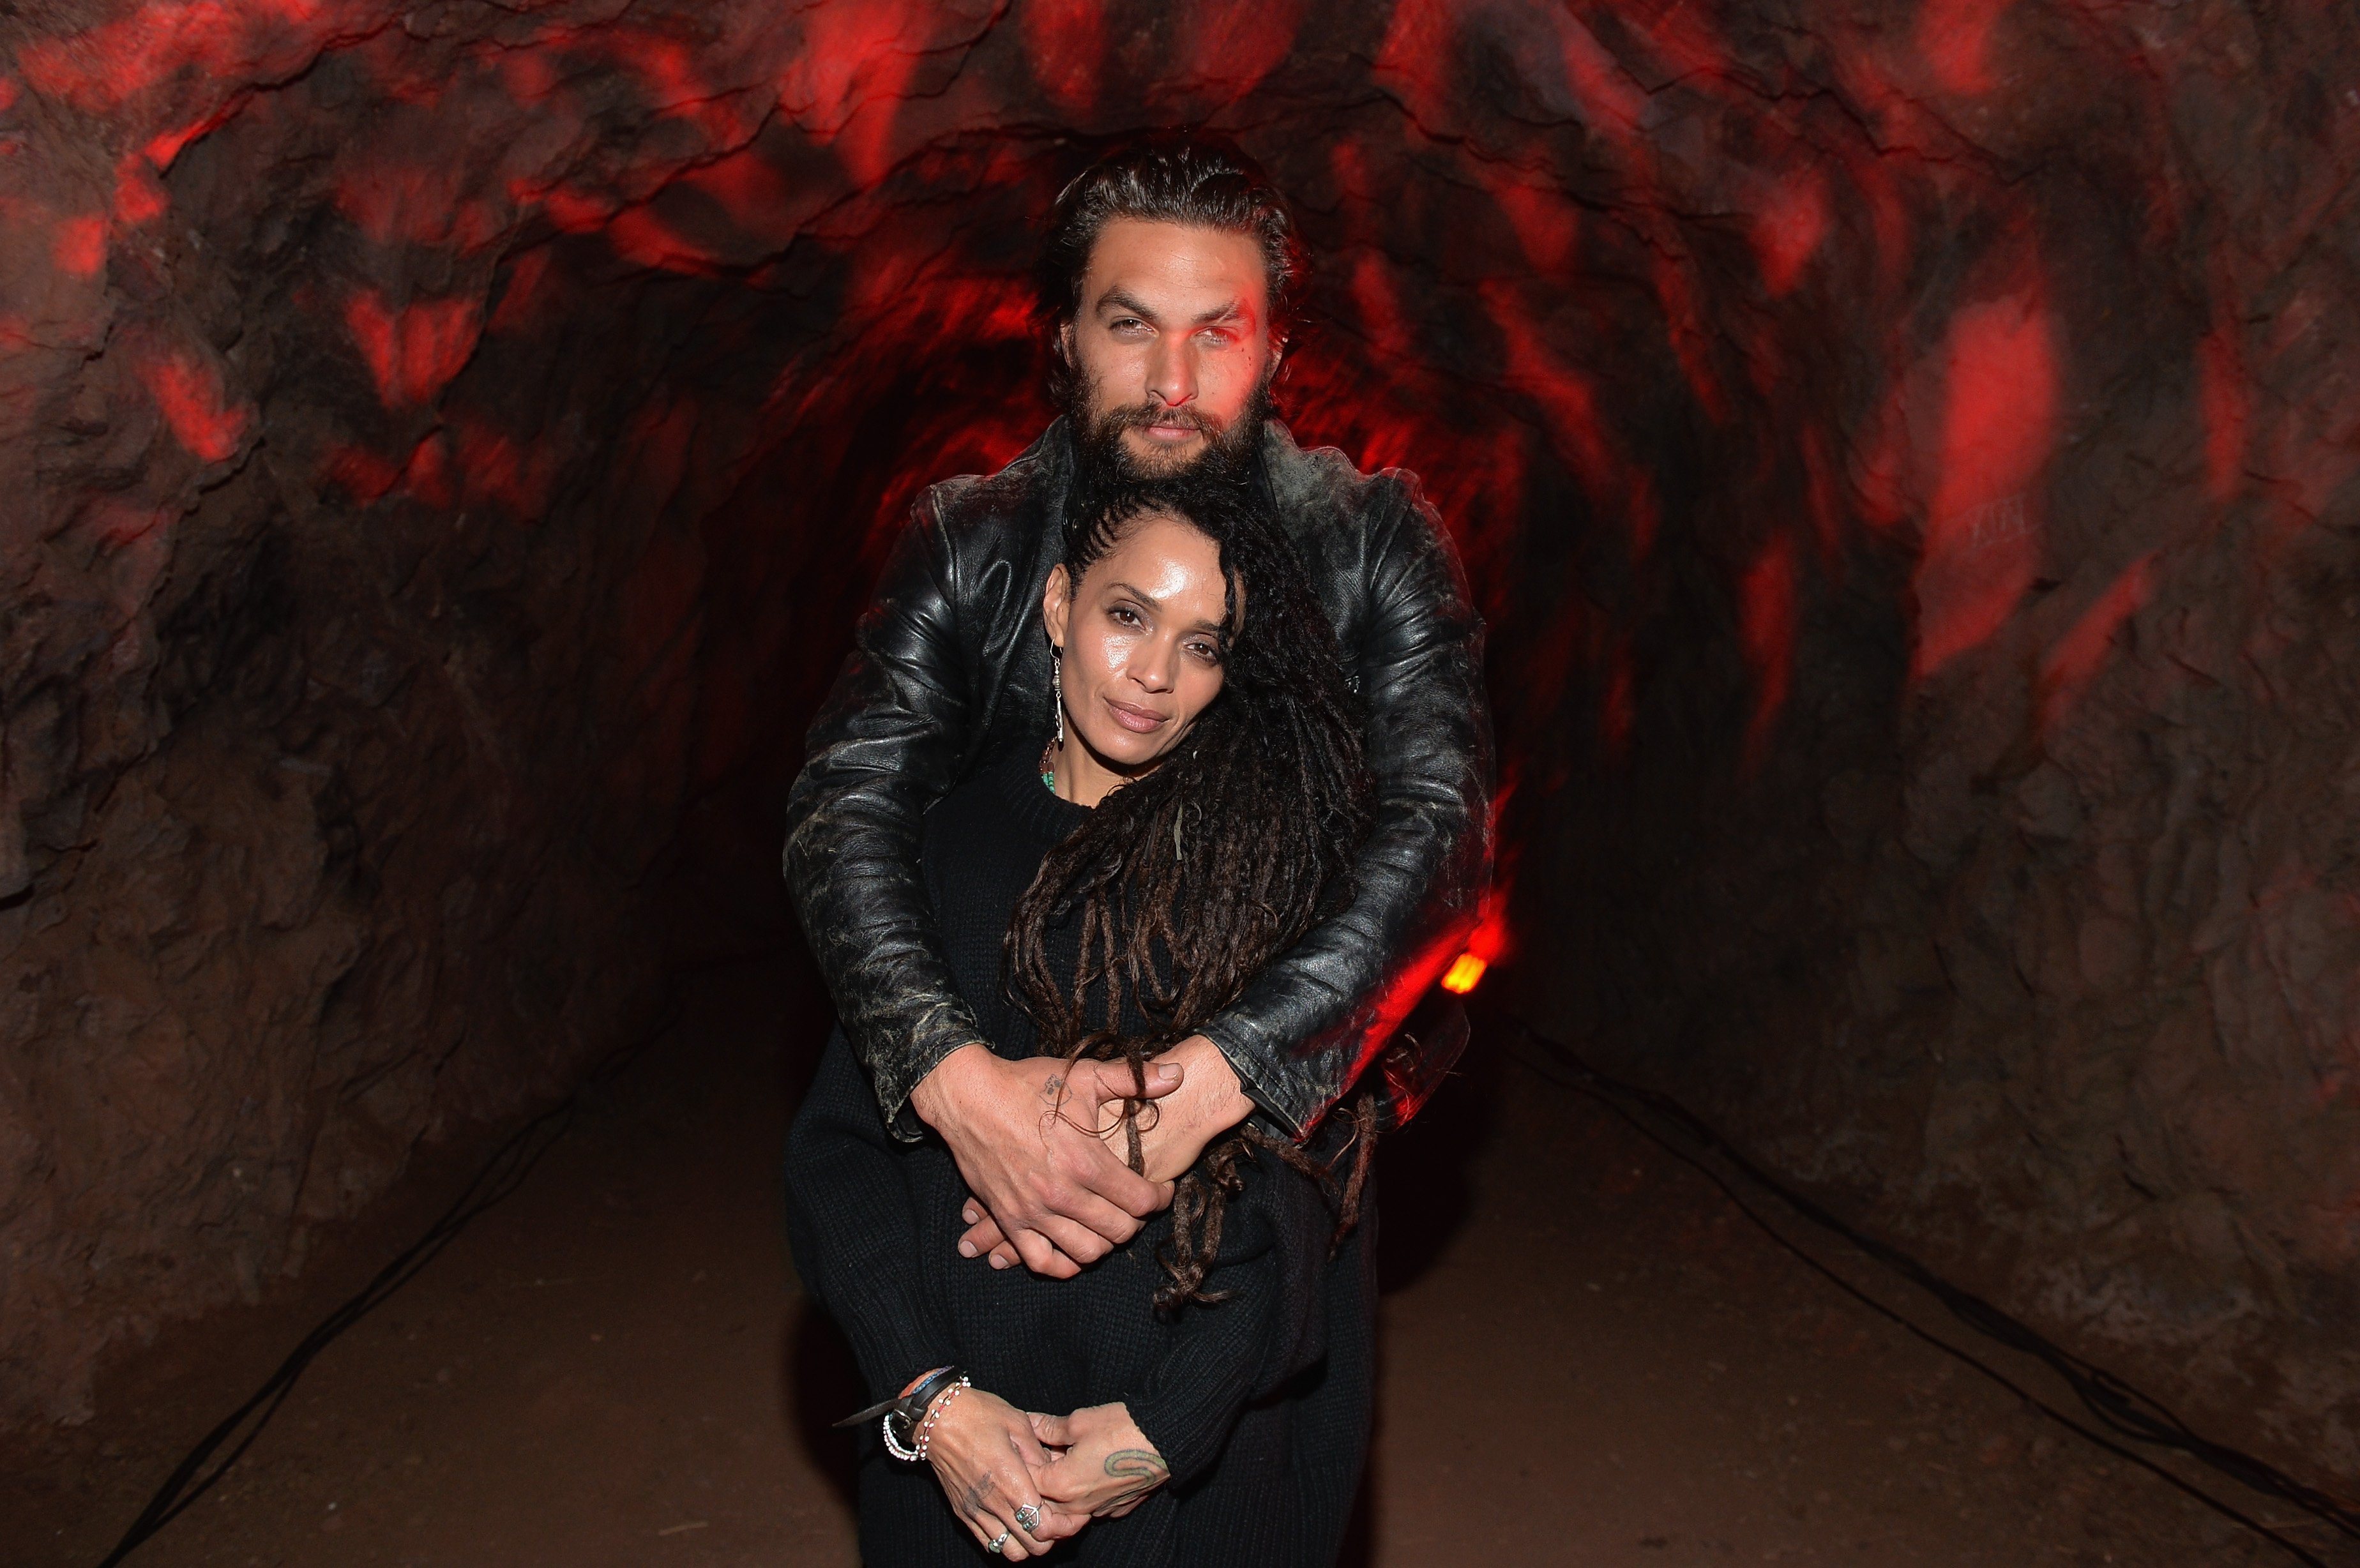 LIsa Bonet and Jason Momoa during a 2014 screening event in Los Angeles. | Photo: Getty Images